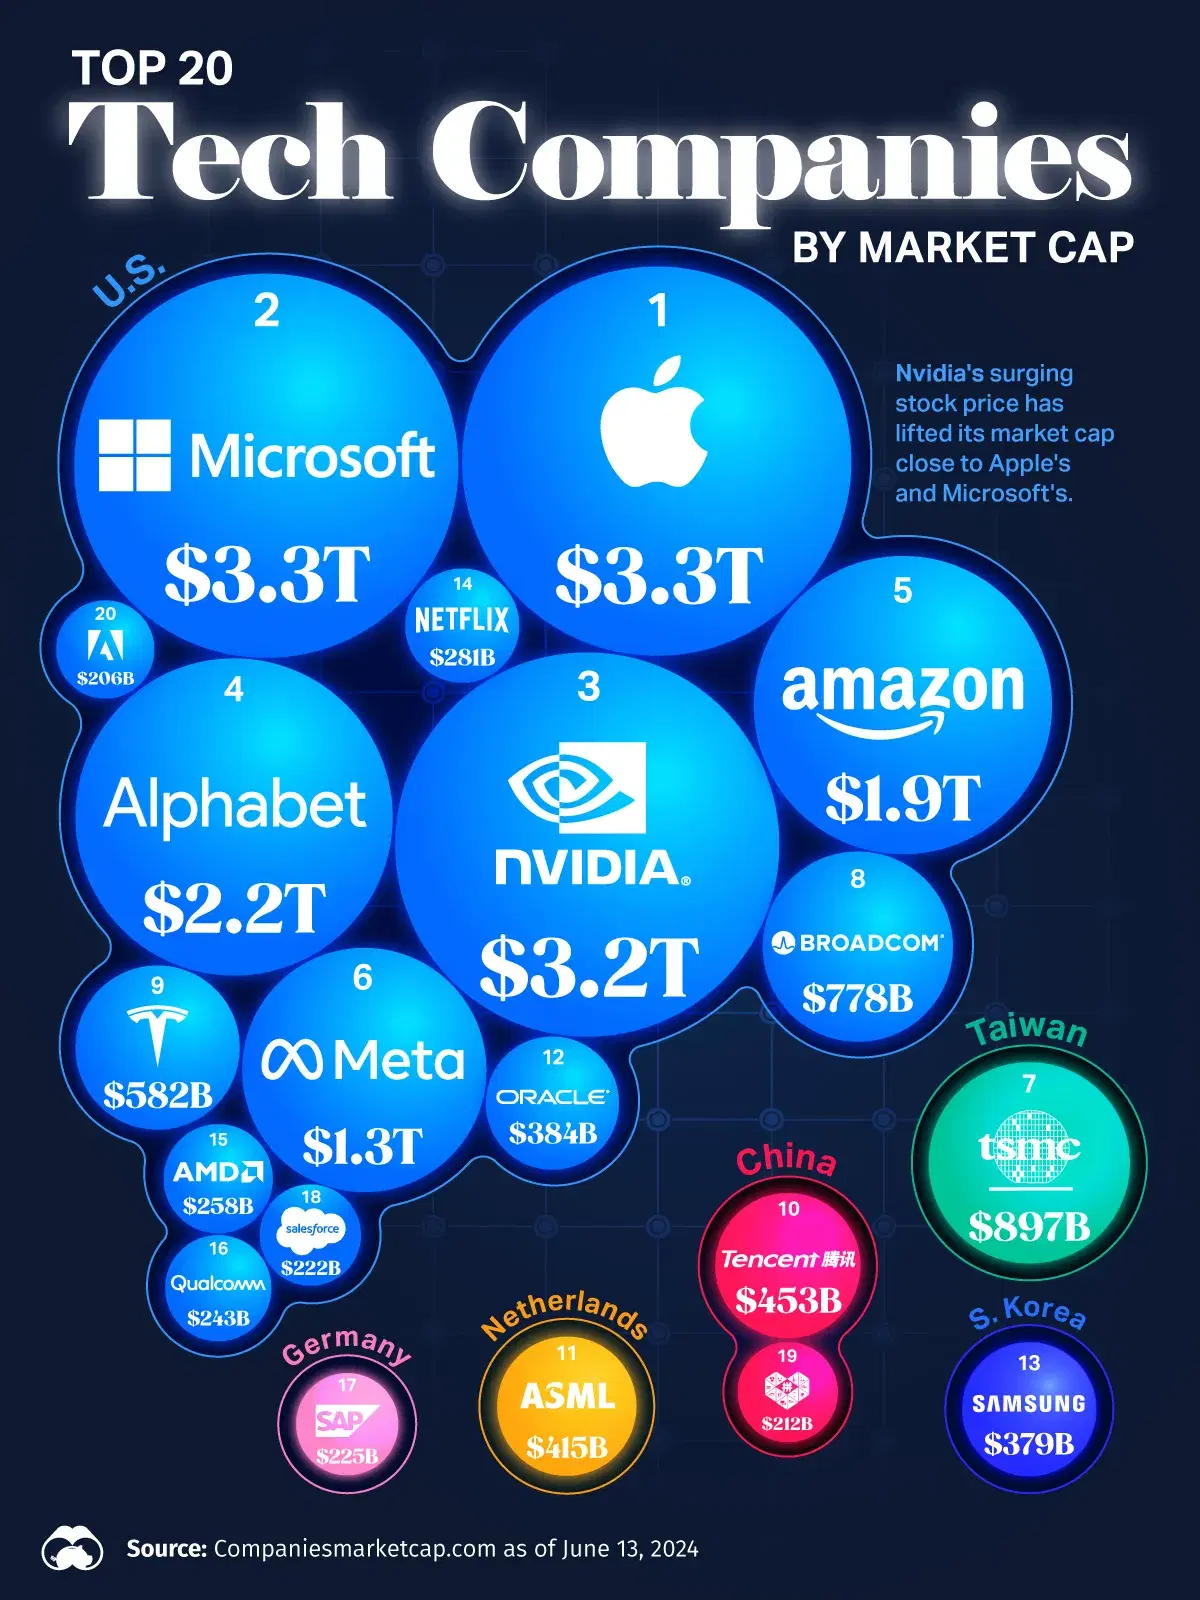 The World's Top 20 Tech Companies by Market Cap